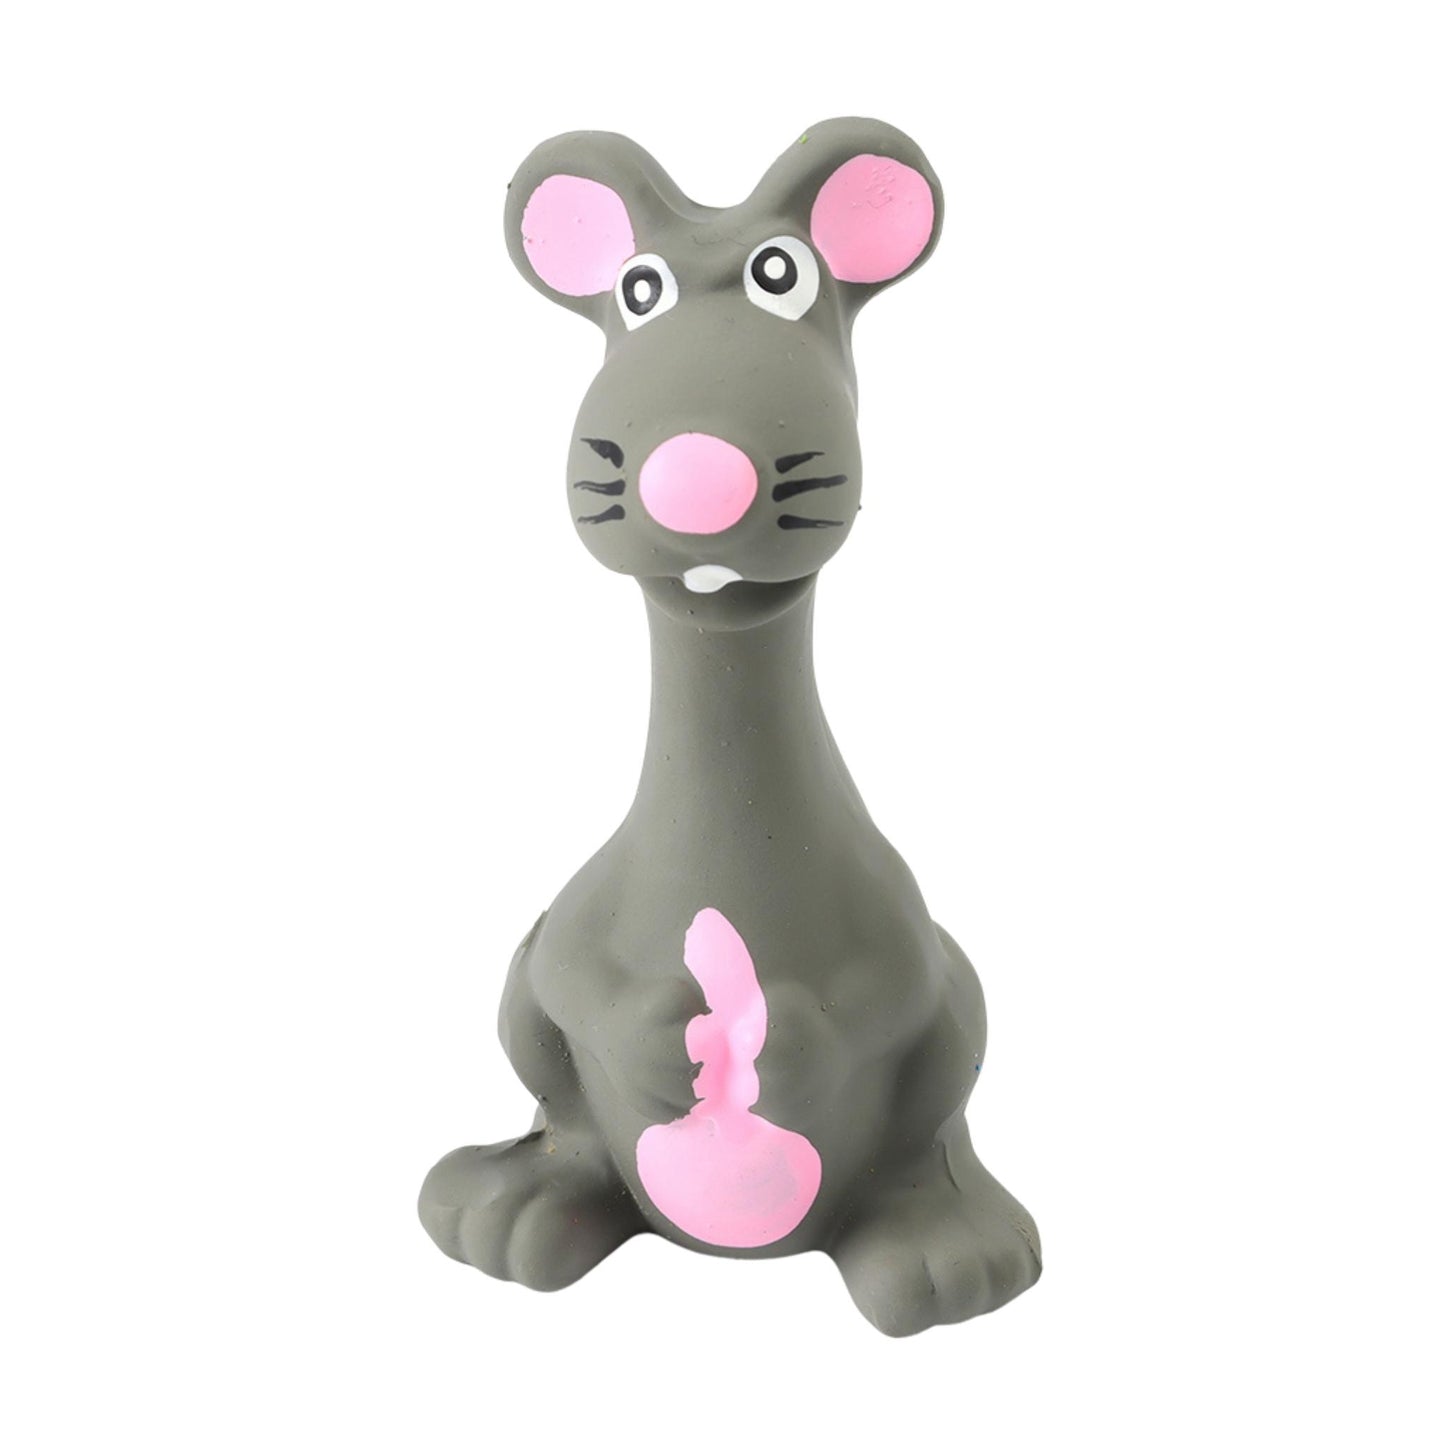 Foodie Puppies Latex Rubber Squeaky Dog Chew Toy - Grey Mouse